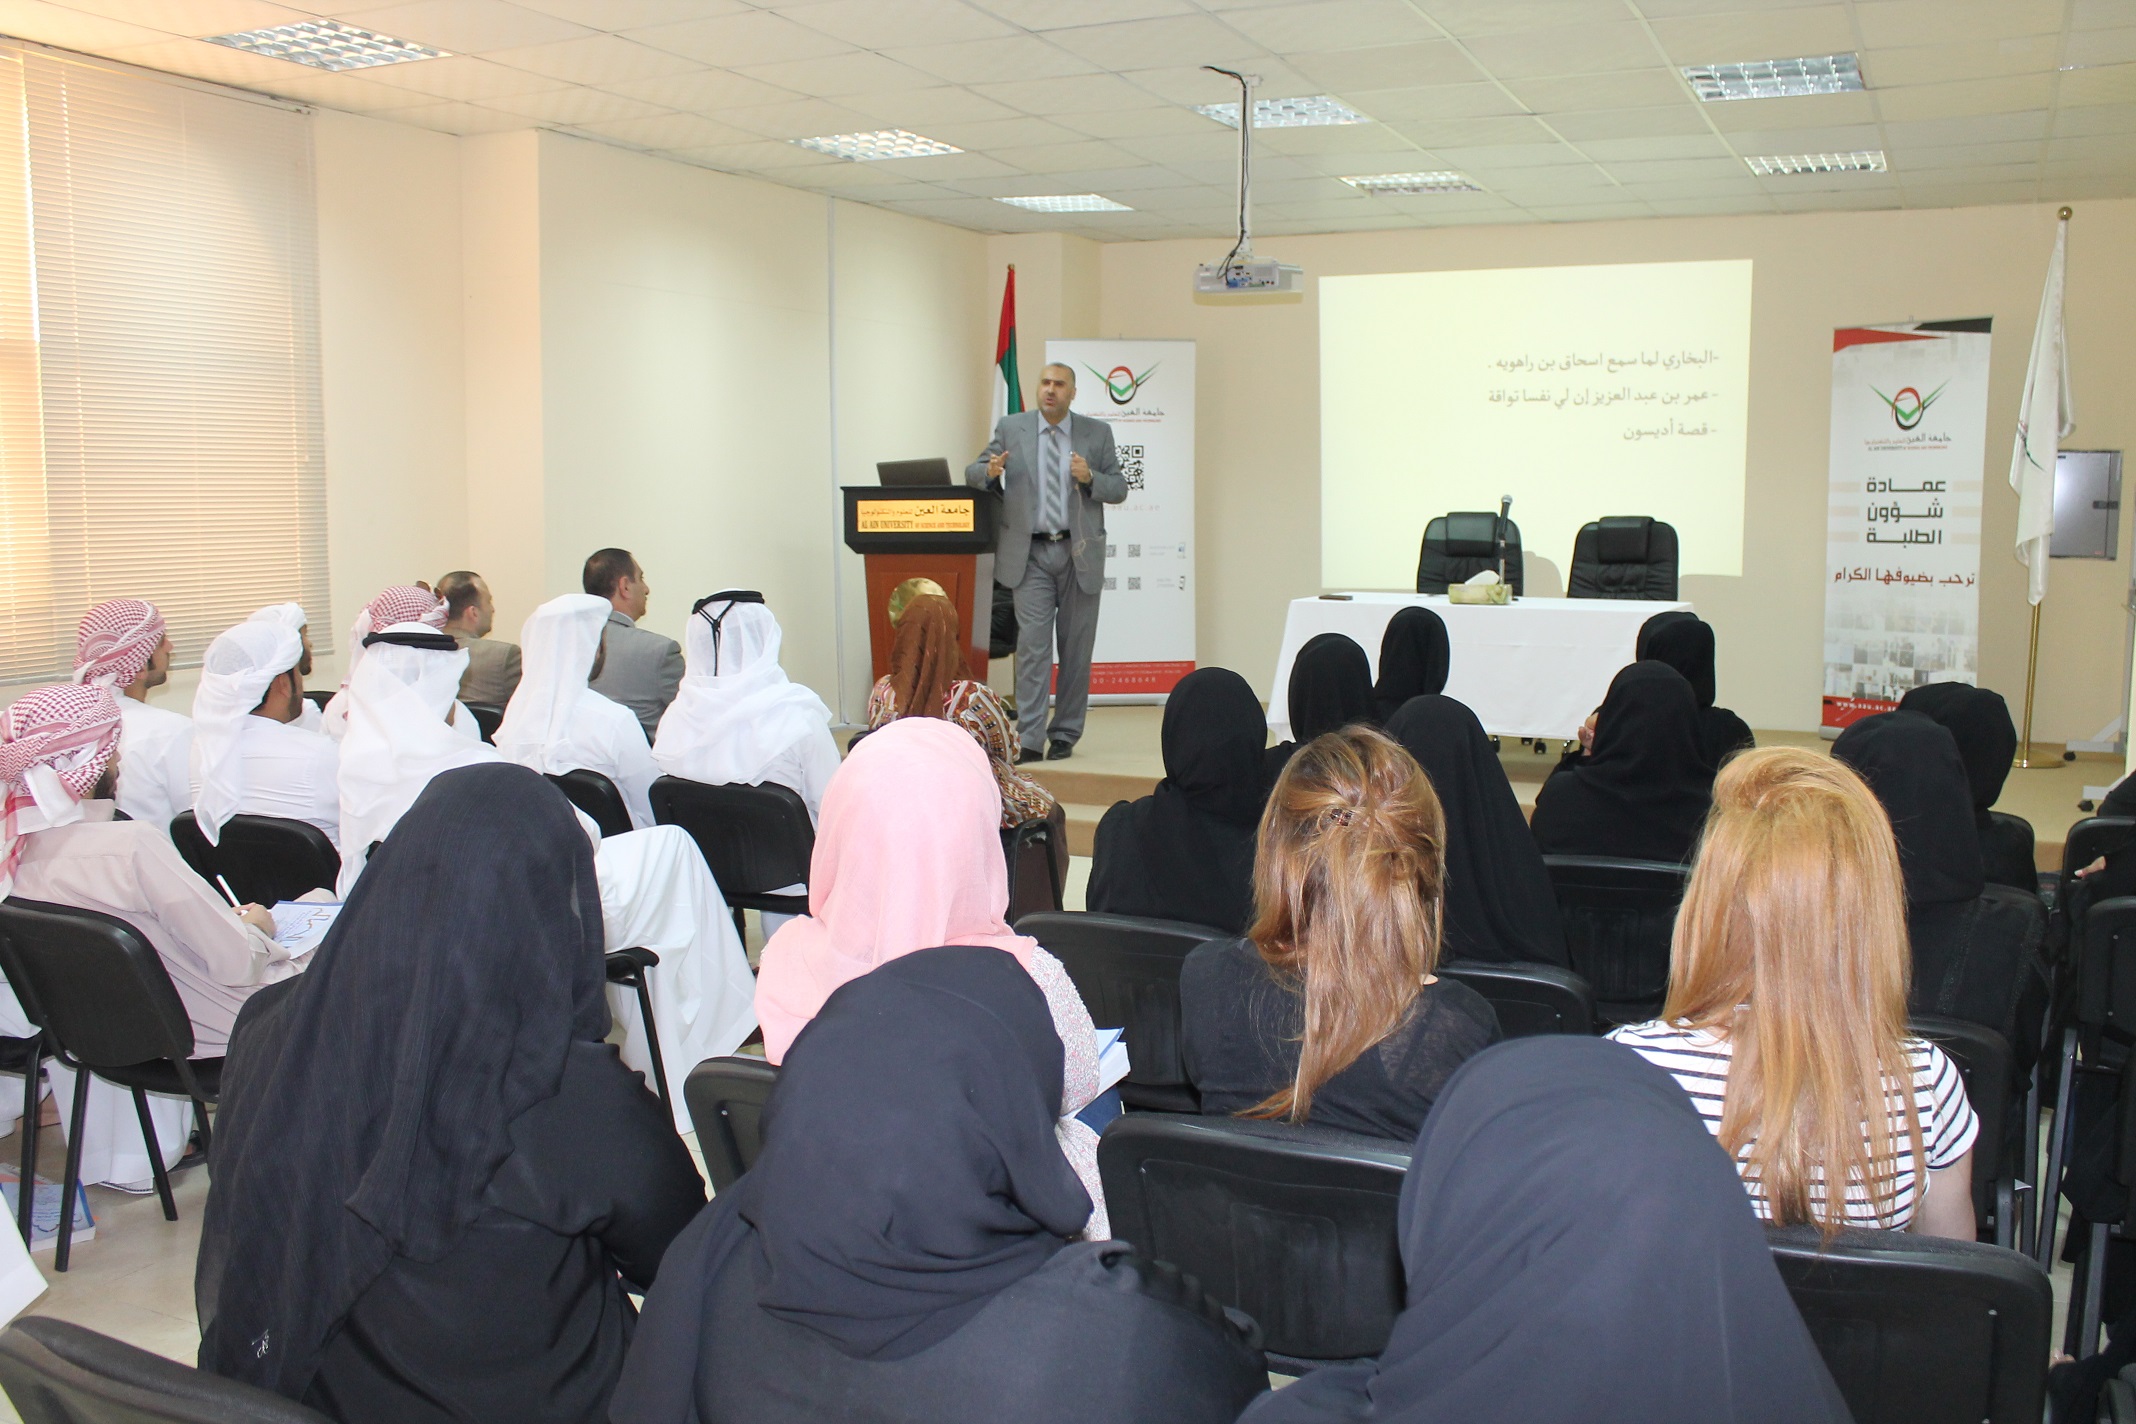 A lecture entitled "Building a Bright Personality" at Al Ain University